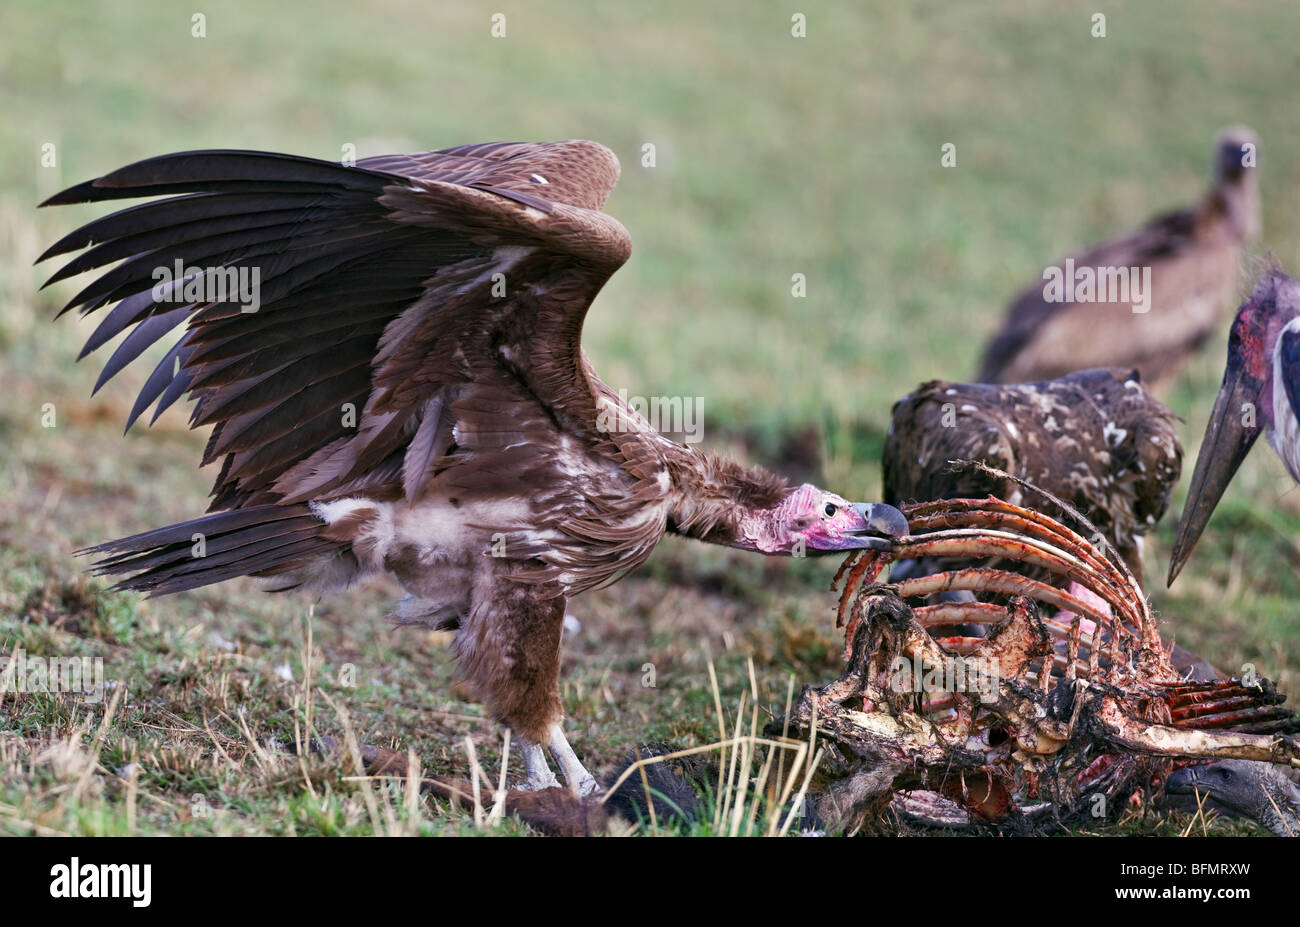 Kenya. A lappet-faced vulture feeds on a wildebeest carcass in Masai Mara National Reserve. Stock Photo